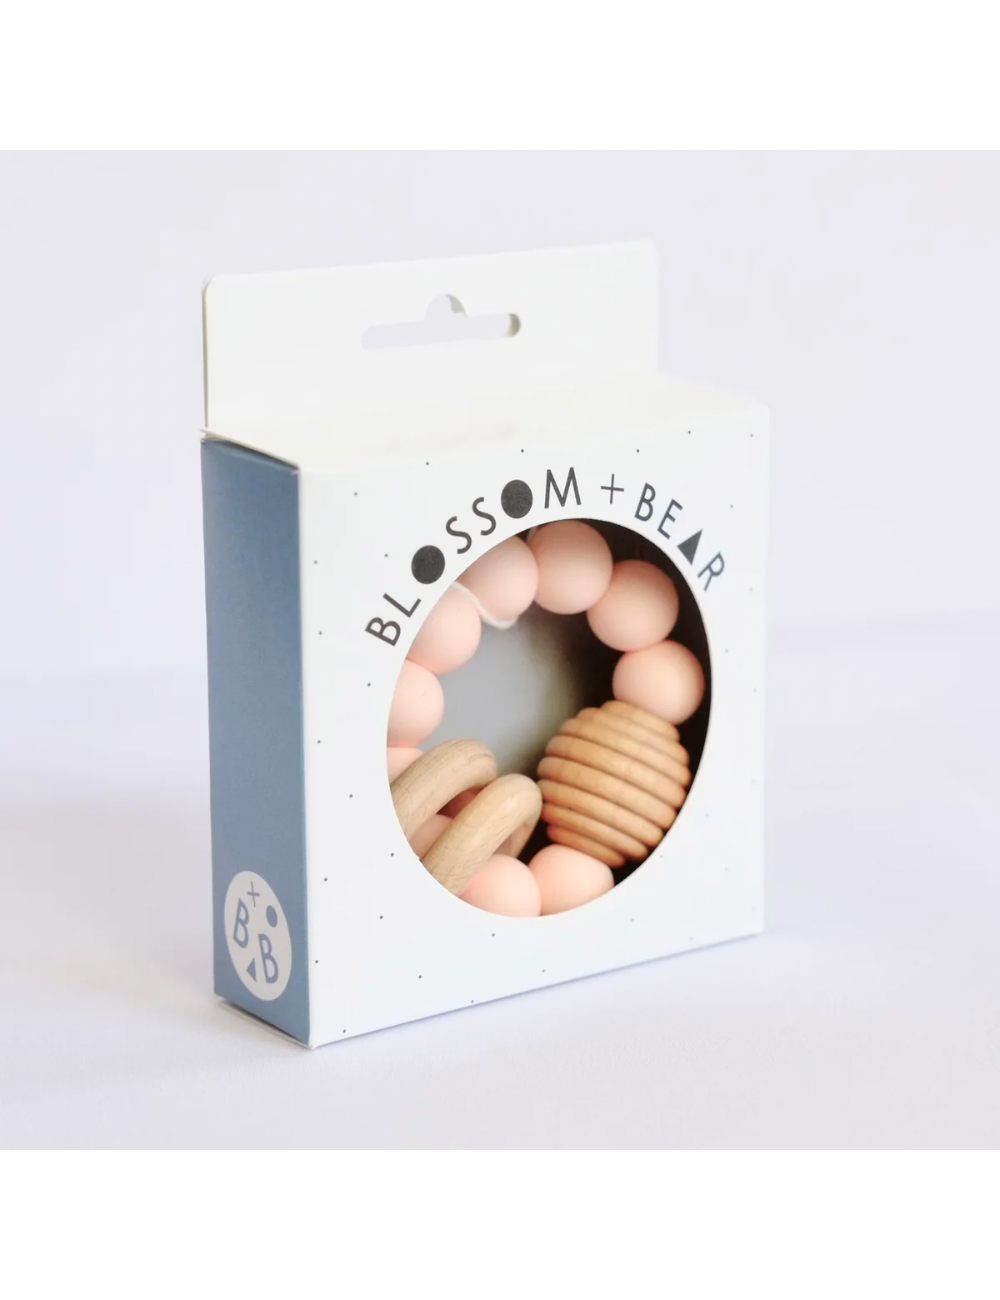 Peach Beehive Silicone and Wooden Teething Toy